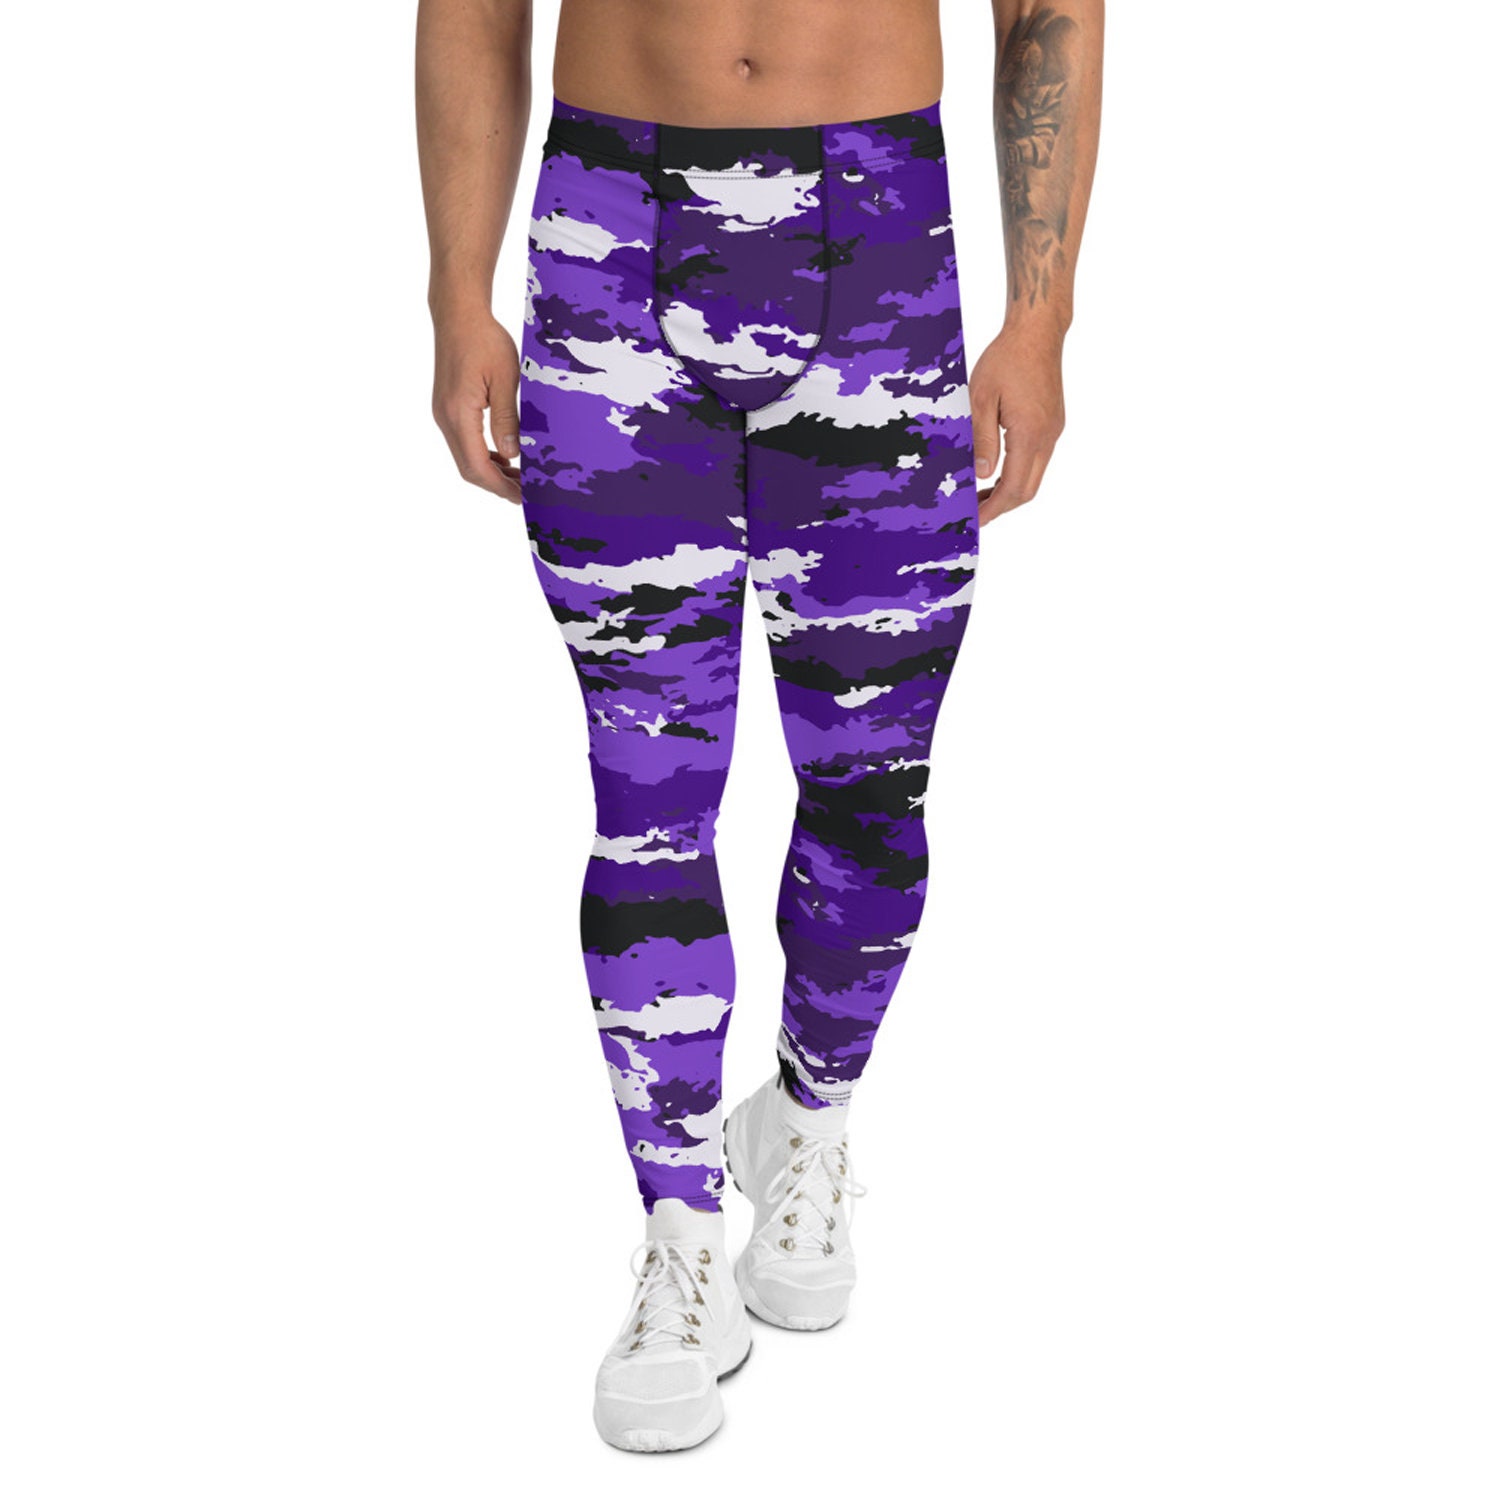 Purple Camo Leggings for Men Army / Military Urban Camouflage - Etsy